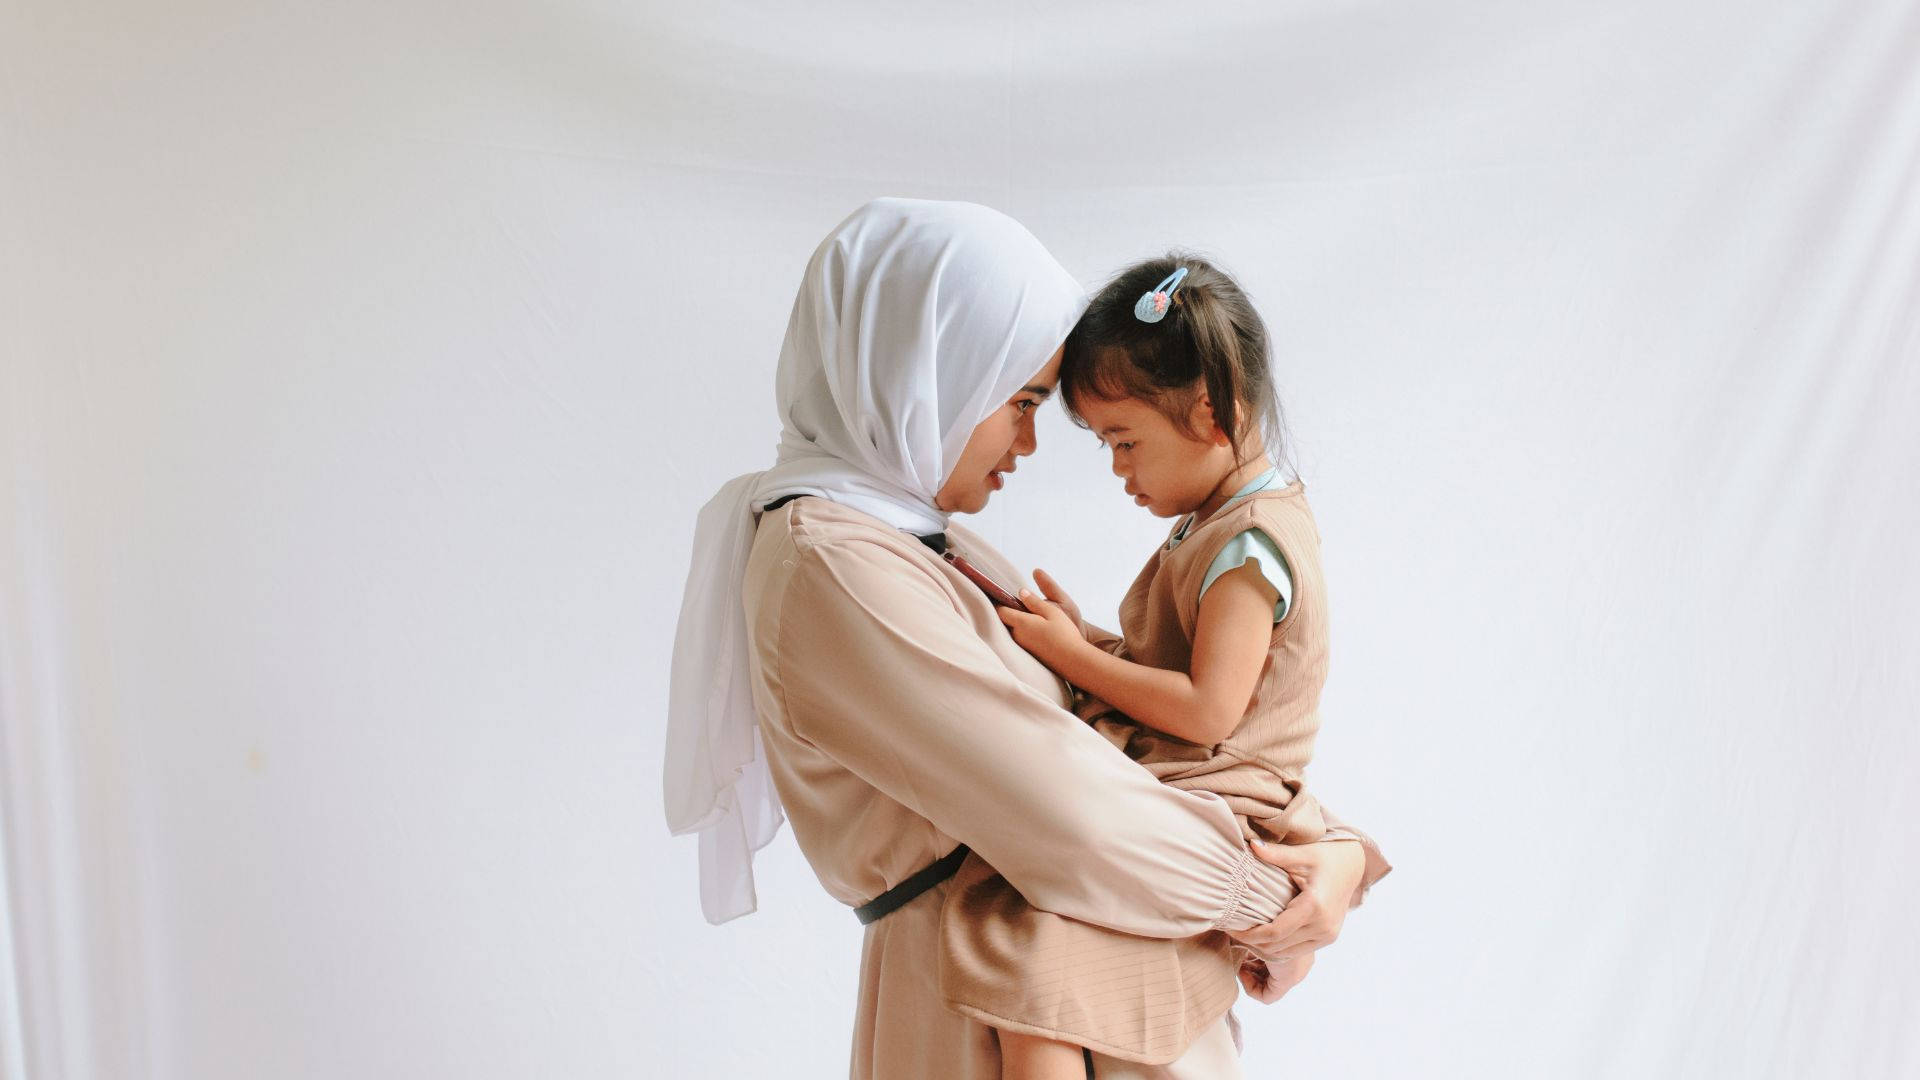 Caption: A Warm Embrace - Loving Muslim Mother Carrying Her Child Wallpaper